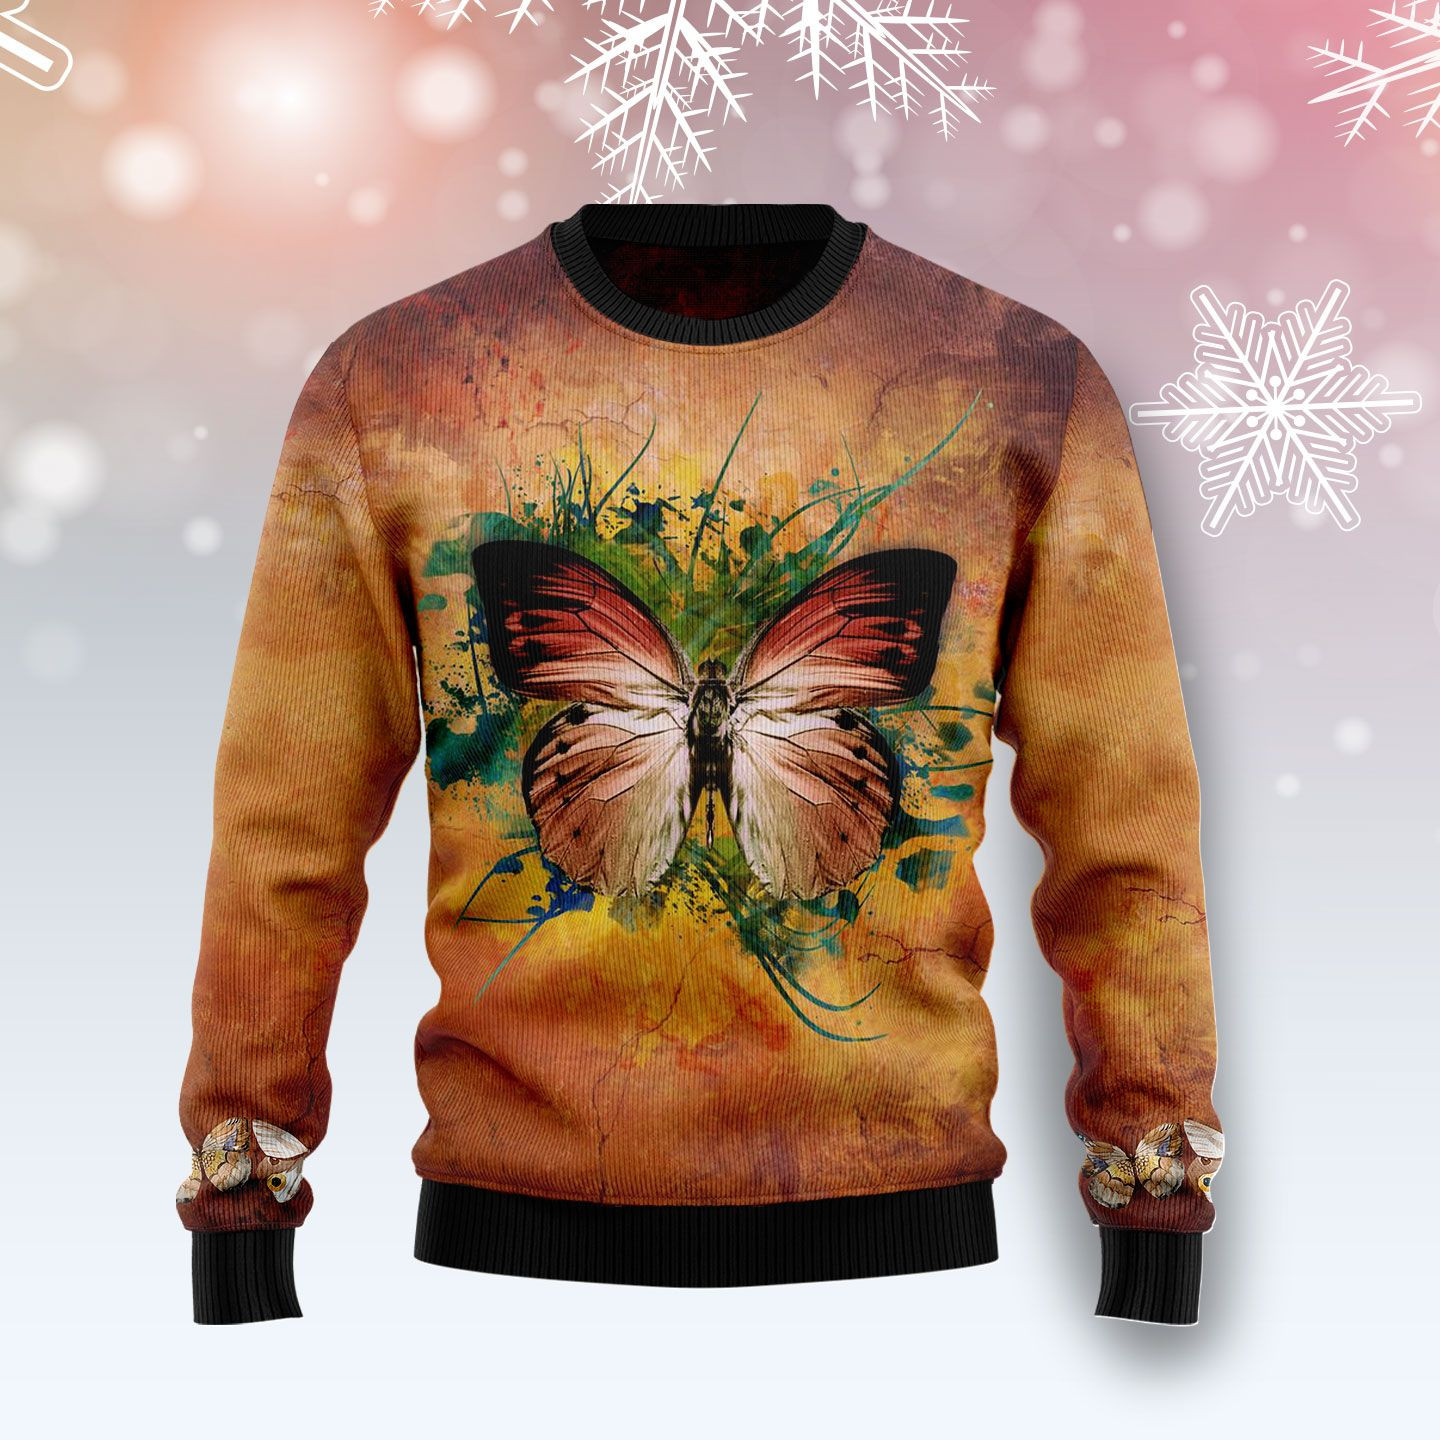 Butterfly Vintage Ugly Christmas Sweater Ugly Sweater For Men Women, Holiday Sweater